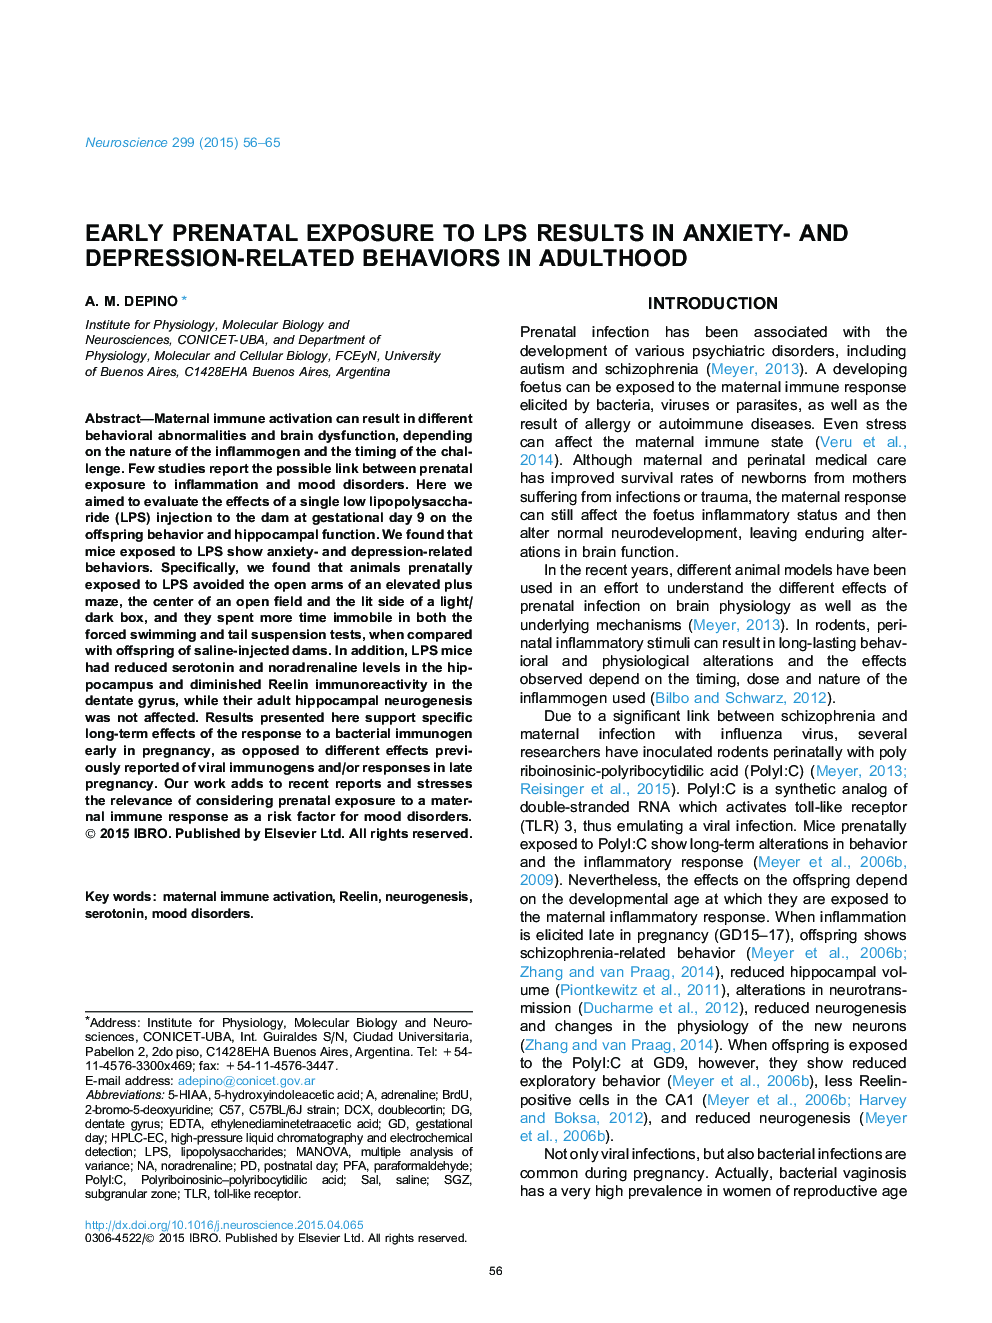 Early prenatal exposure to LPS results in anxiety- and depression-related behaviors in adulthood